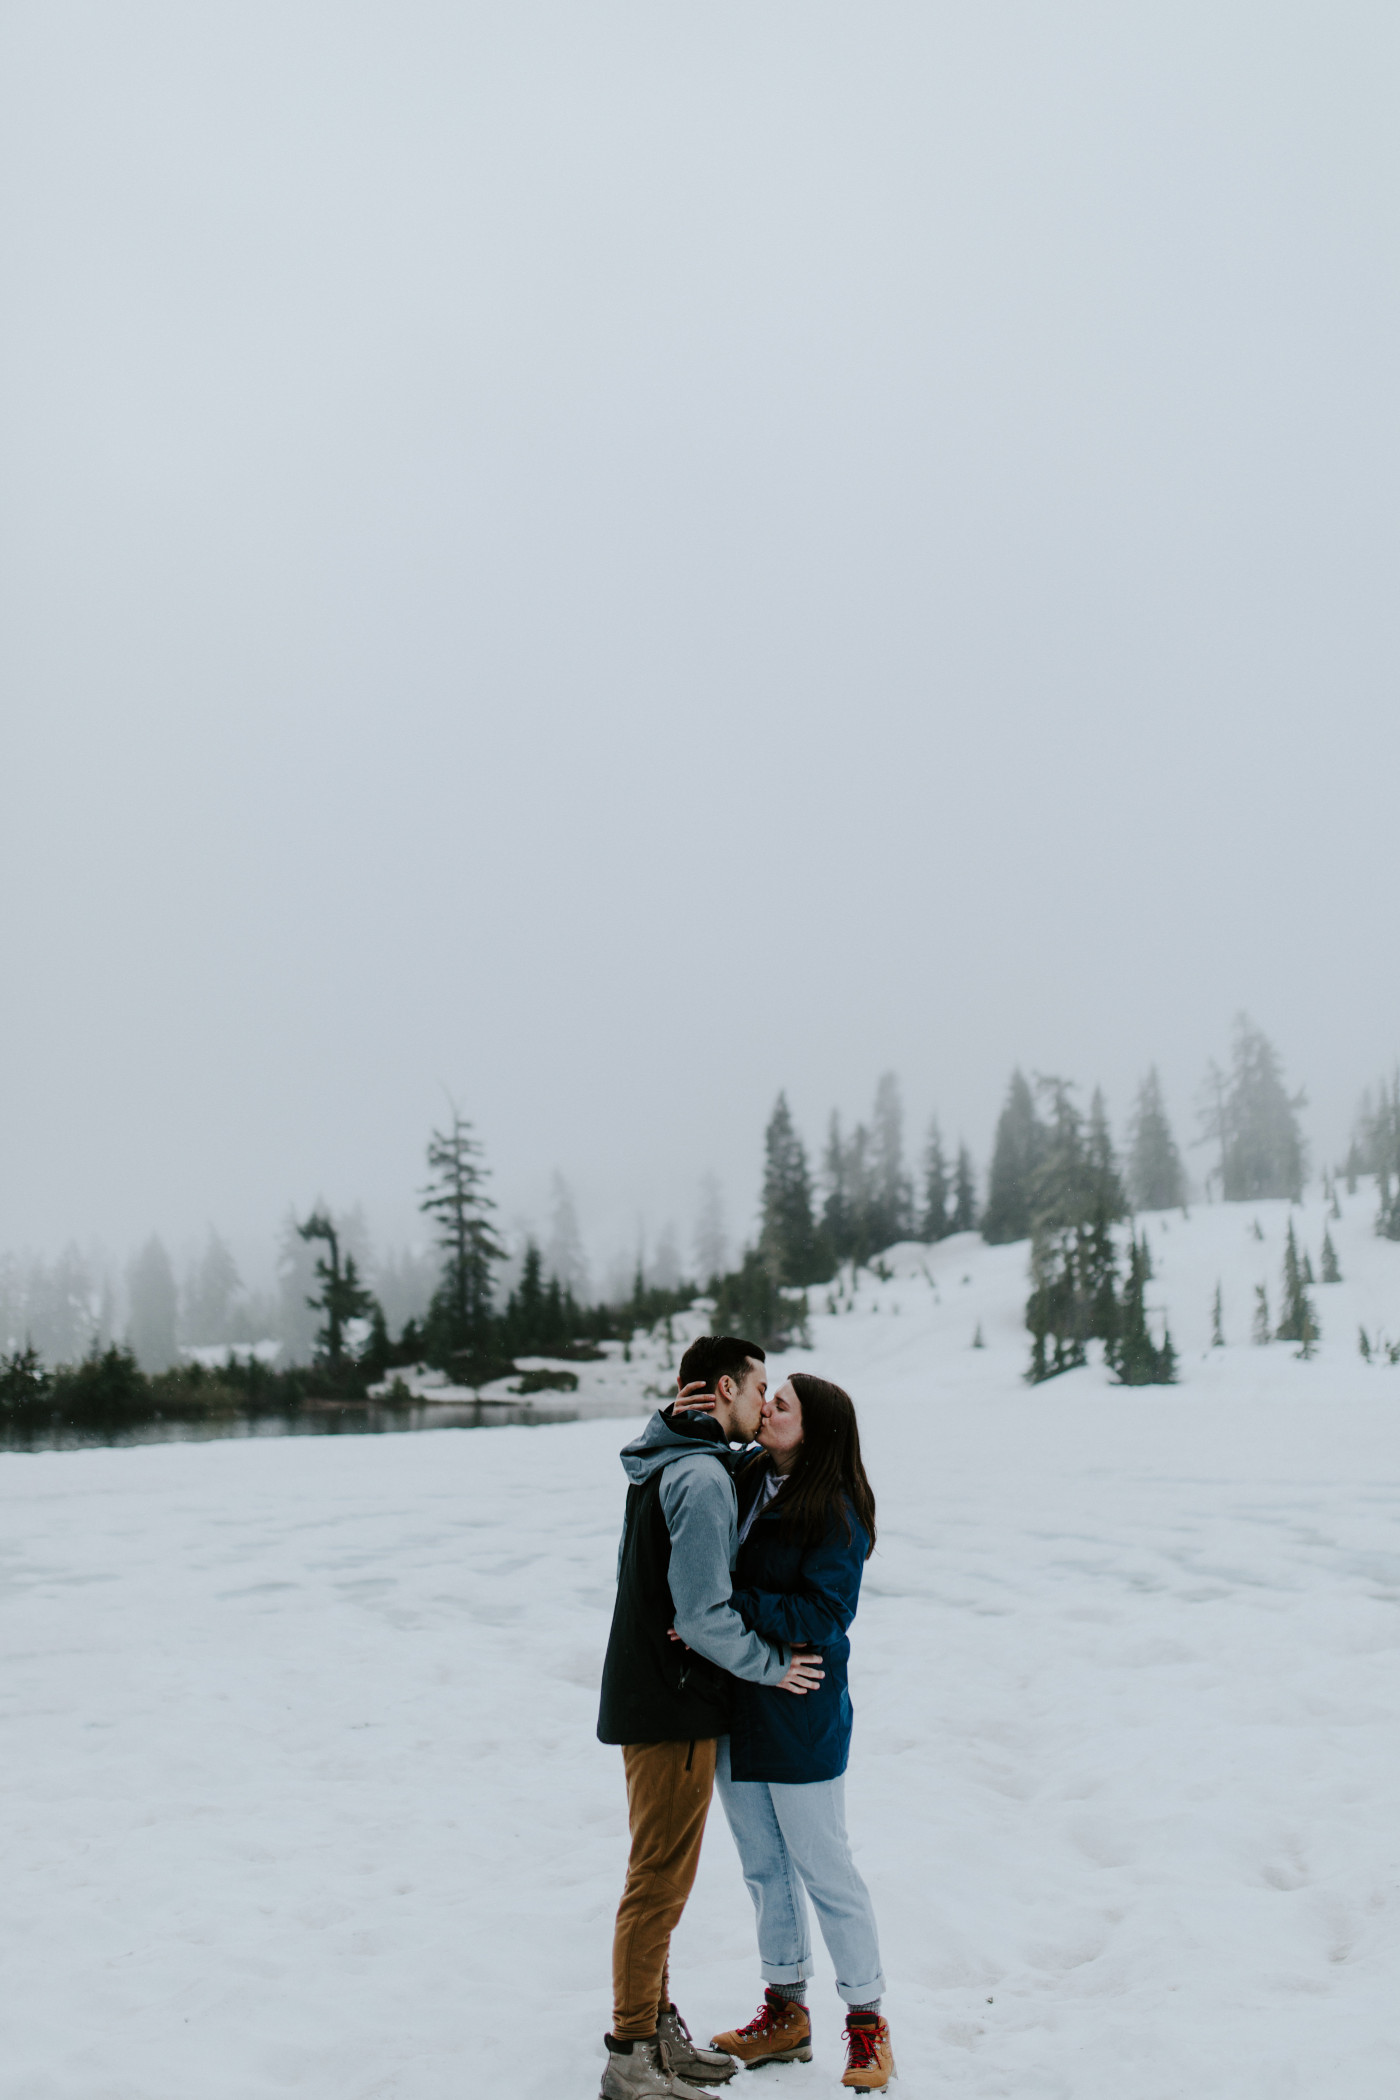 Kyle and Taylor kiss in the snow. Elopement photography at North Cascades National Park by Sienna Plus Josh.